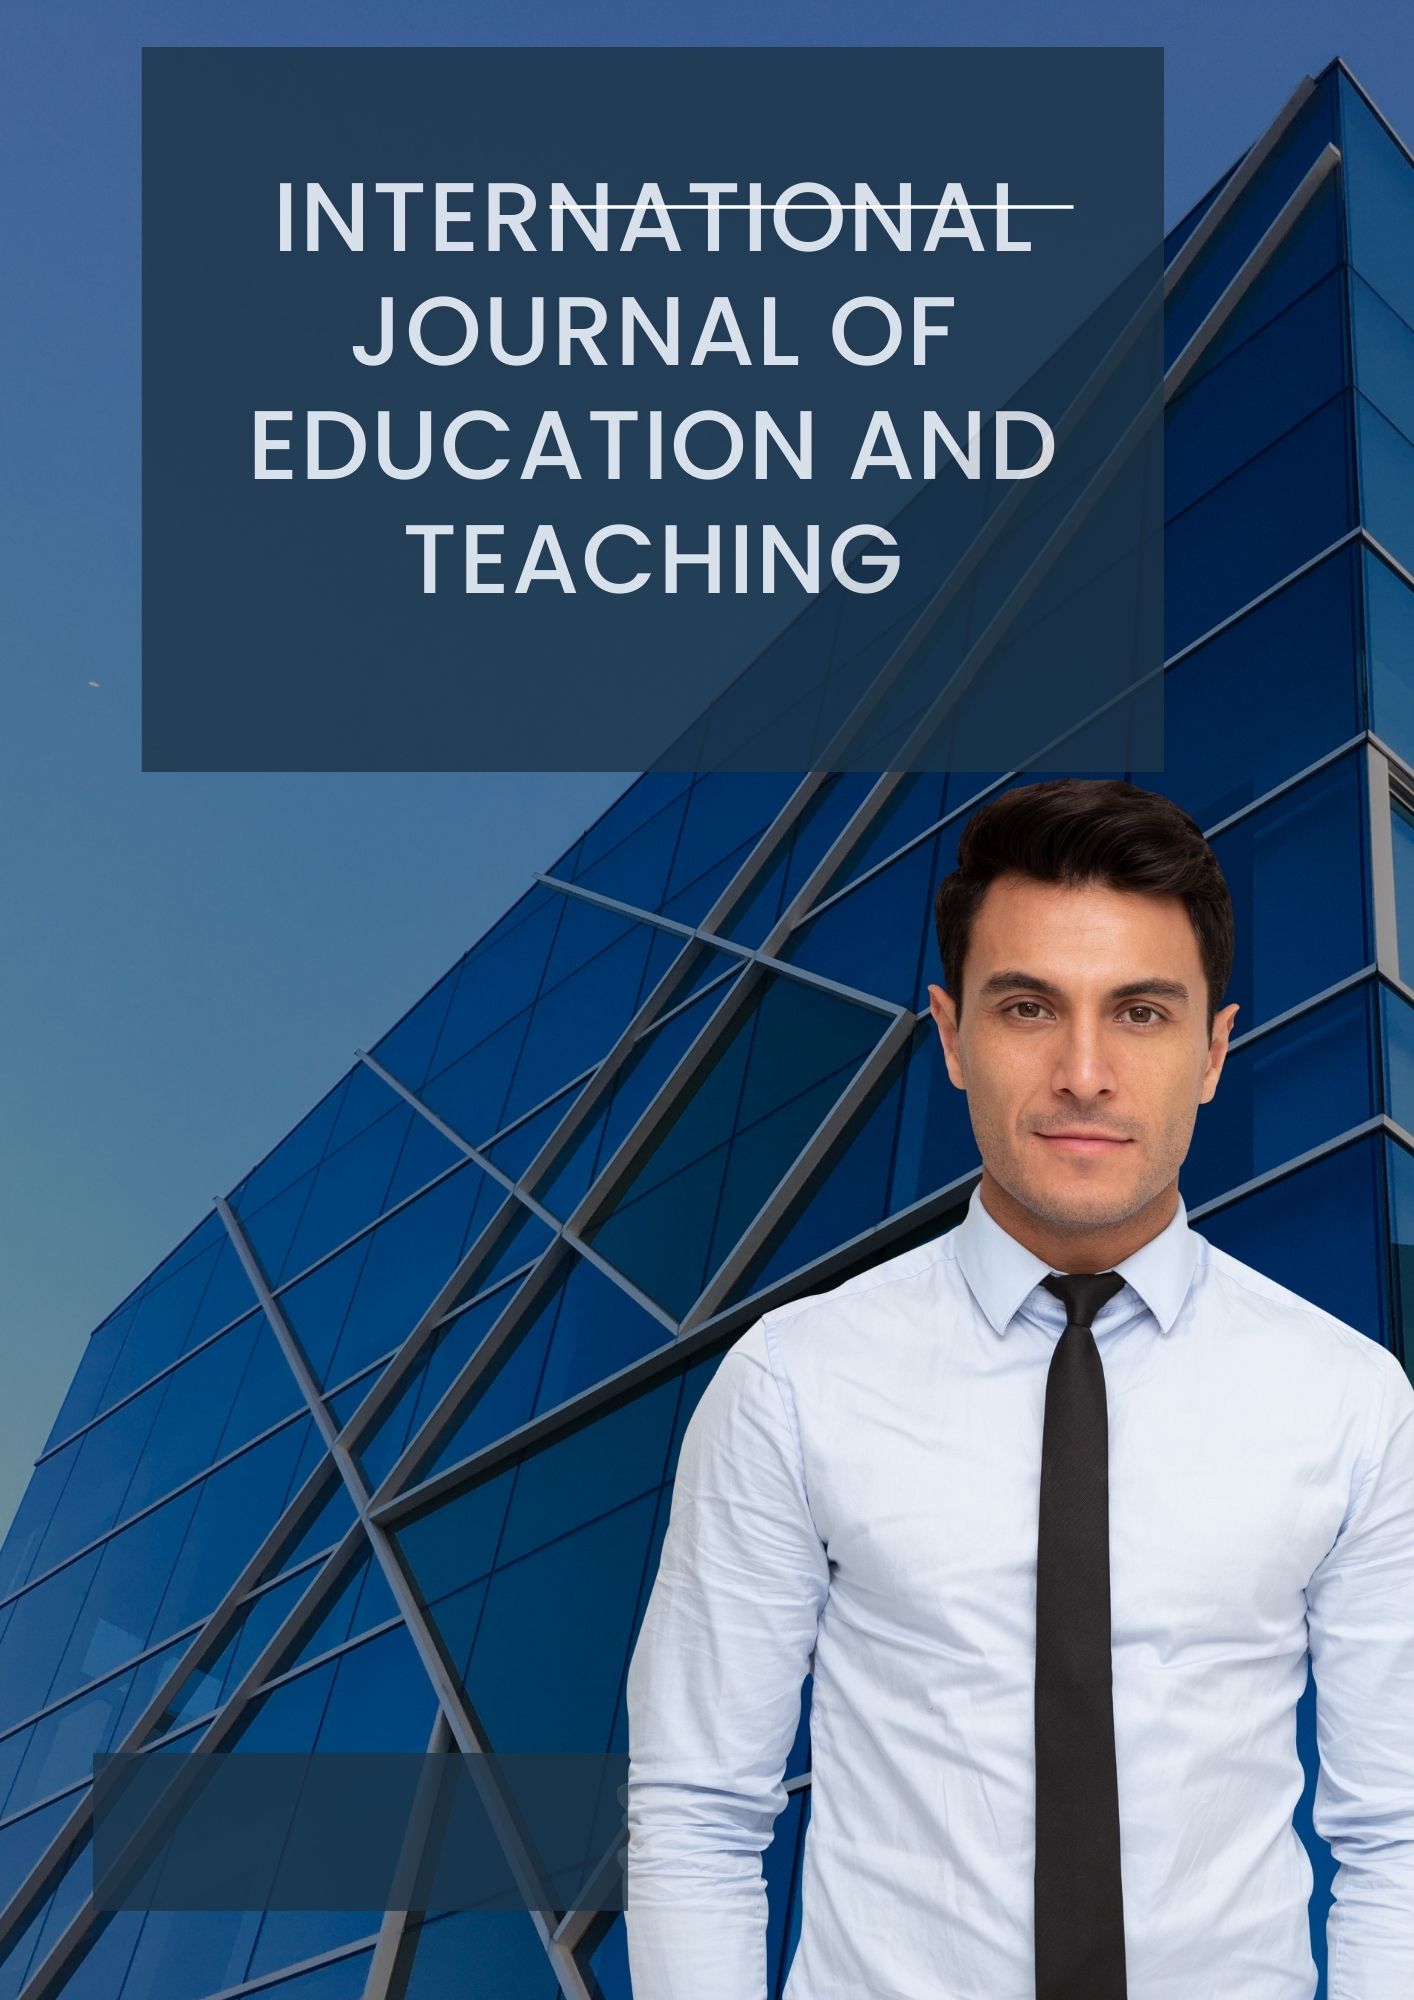 International Journal of Education and Teaching